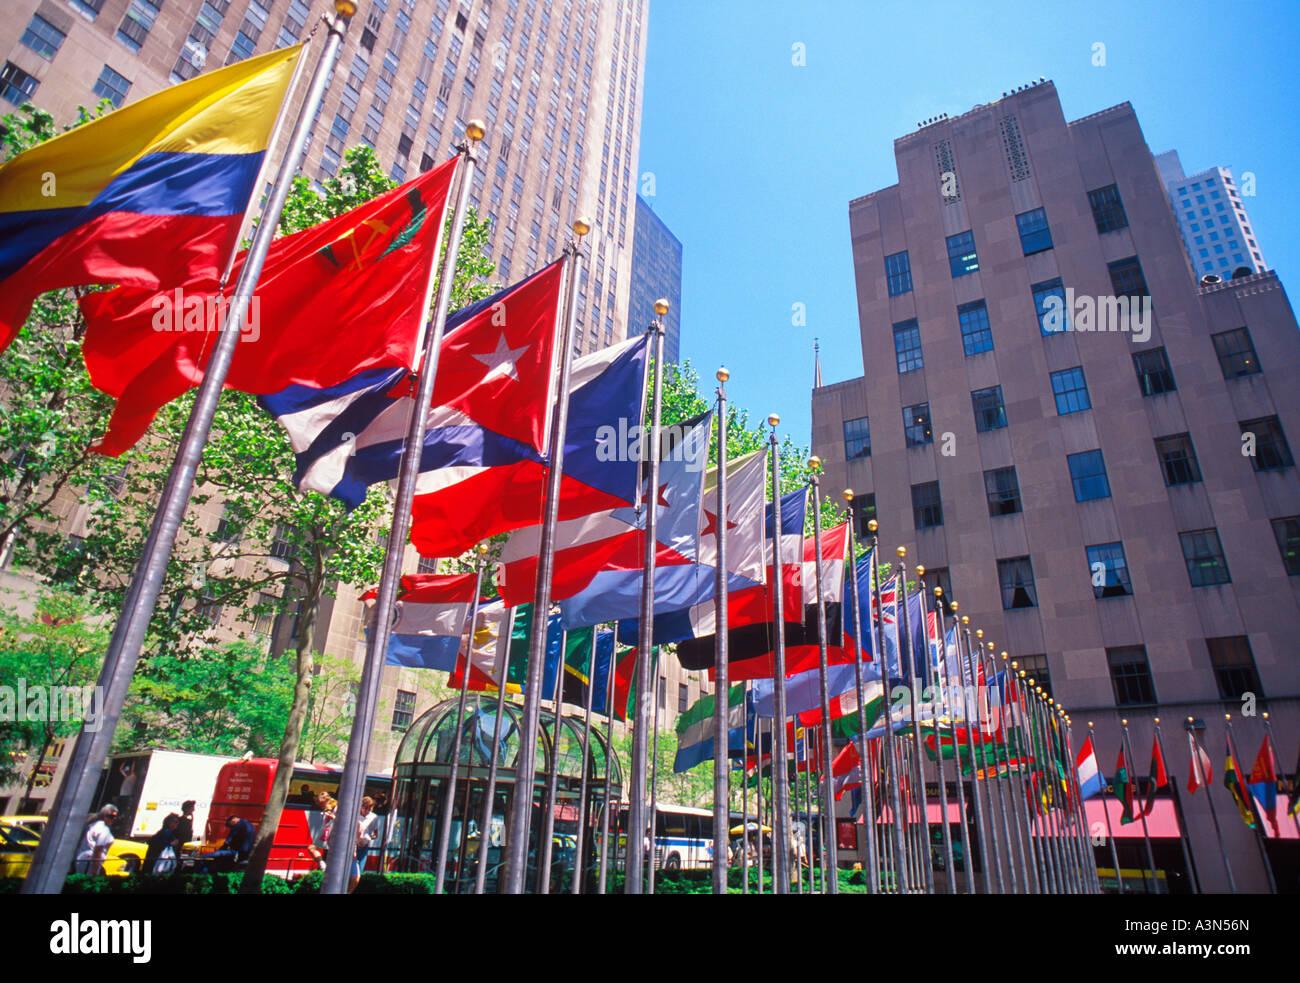 New York City Rockefeller Center Plaza and the Rockefeller Center complex of buildings. International flags circle the skating rink. Stock Photo